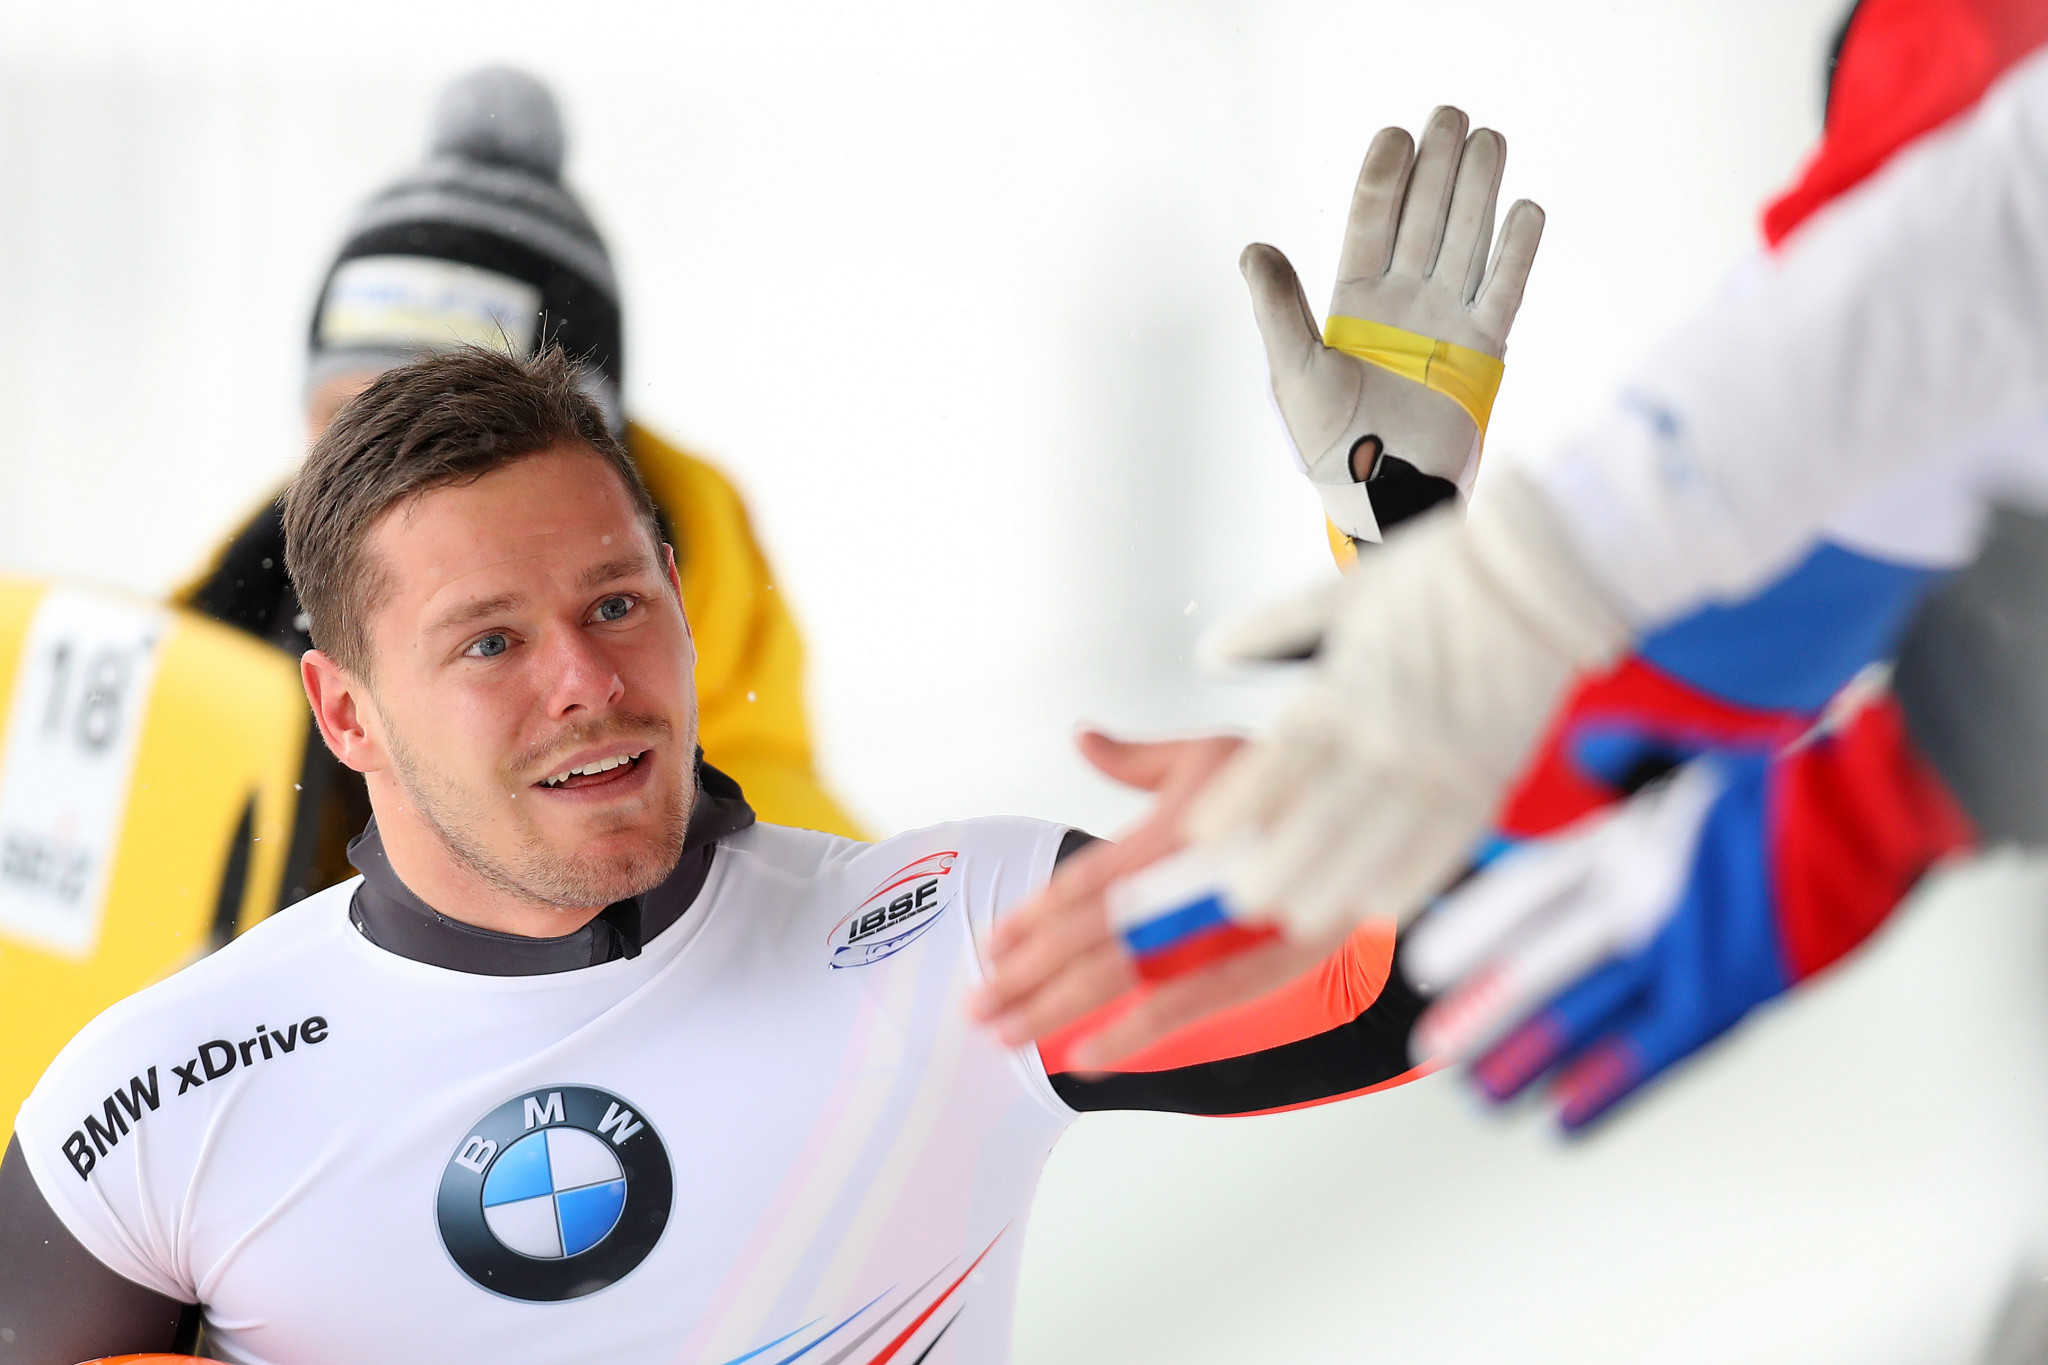 Germany names skeleton squad for new World Cup season